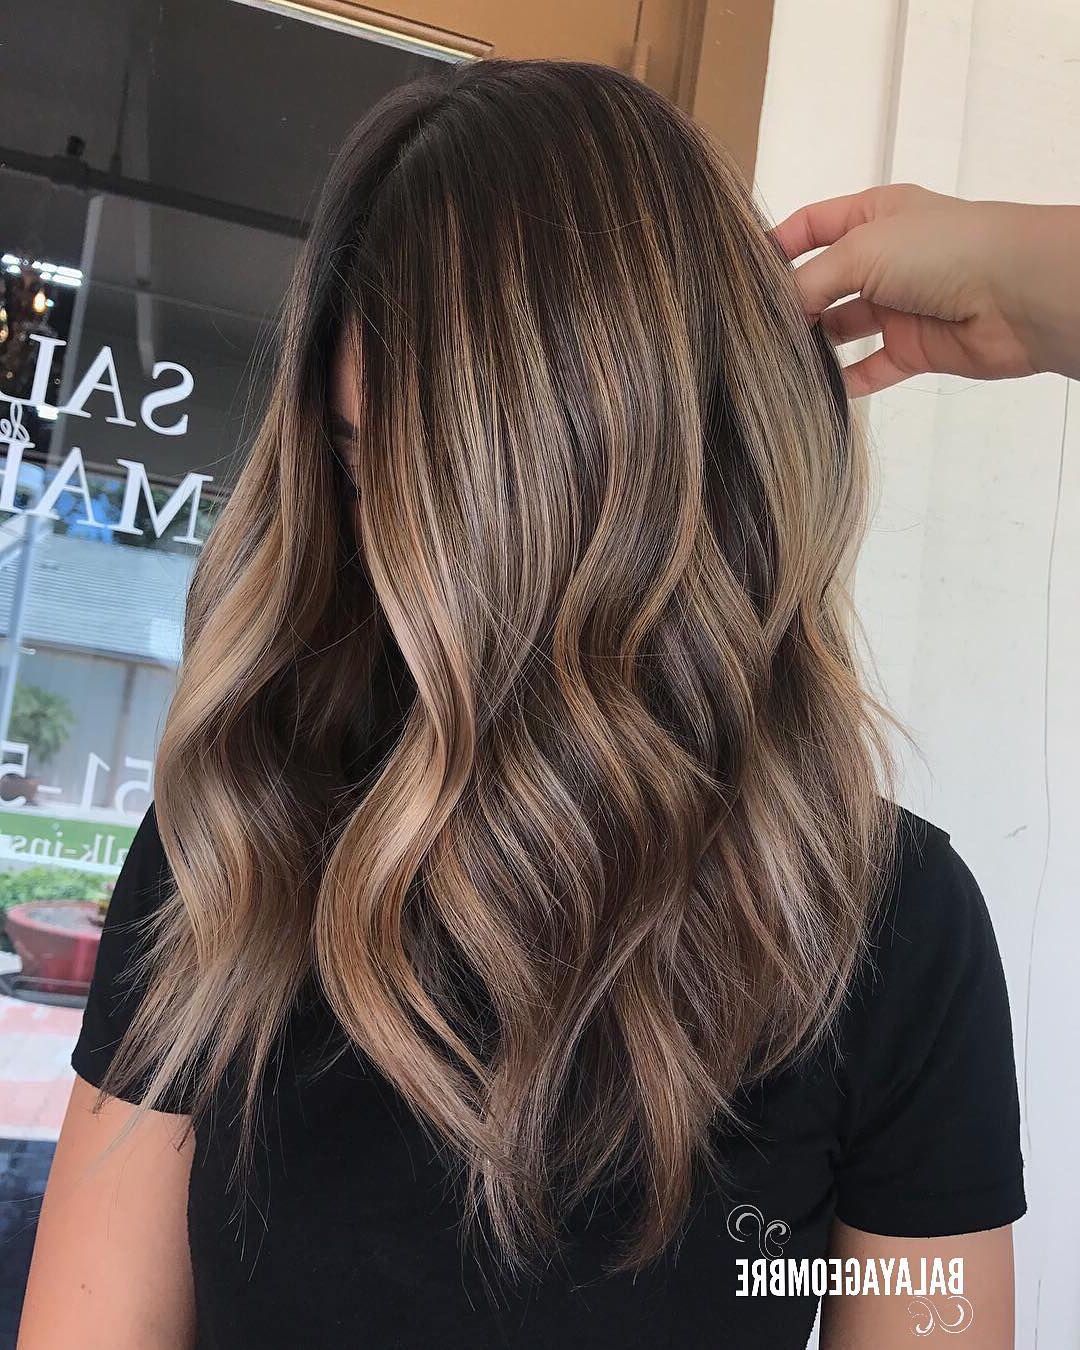 Most Current Medium Hairstyles With Layered Bottom Pertaining To 10 Best Medium Layered Hairstyles 2019 – Brown & Ash Blonde Fashion (View 9 of 20)